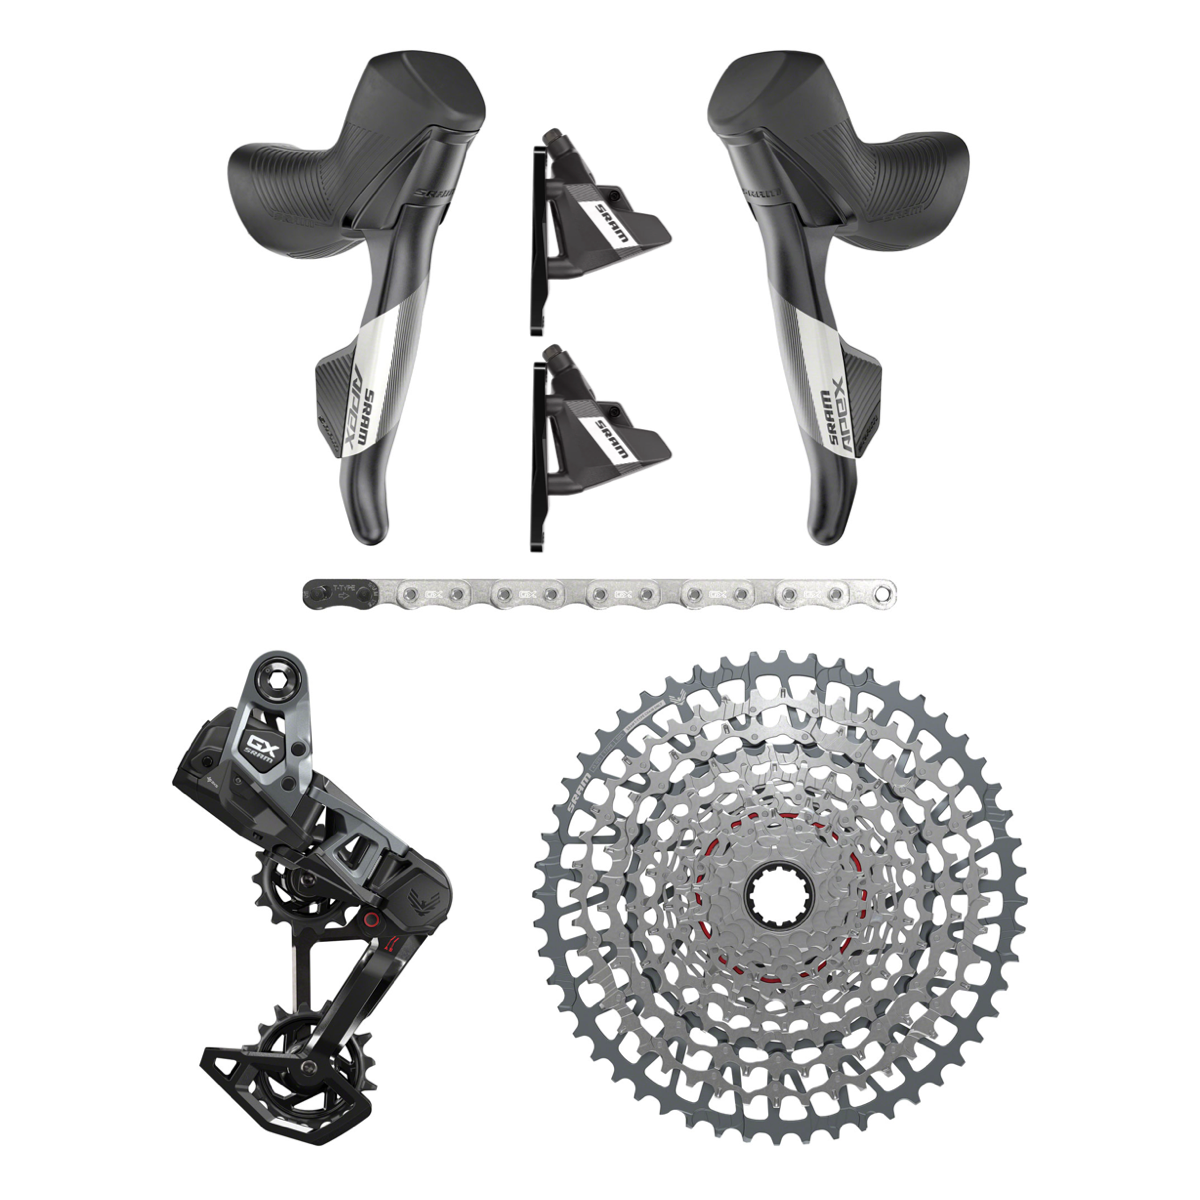 NEW SRAM Apex Eagle T-Type AXS Transmission Mullet Groupset Kit, UDH ONLY